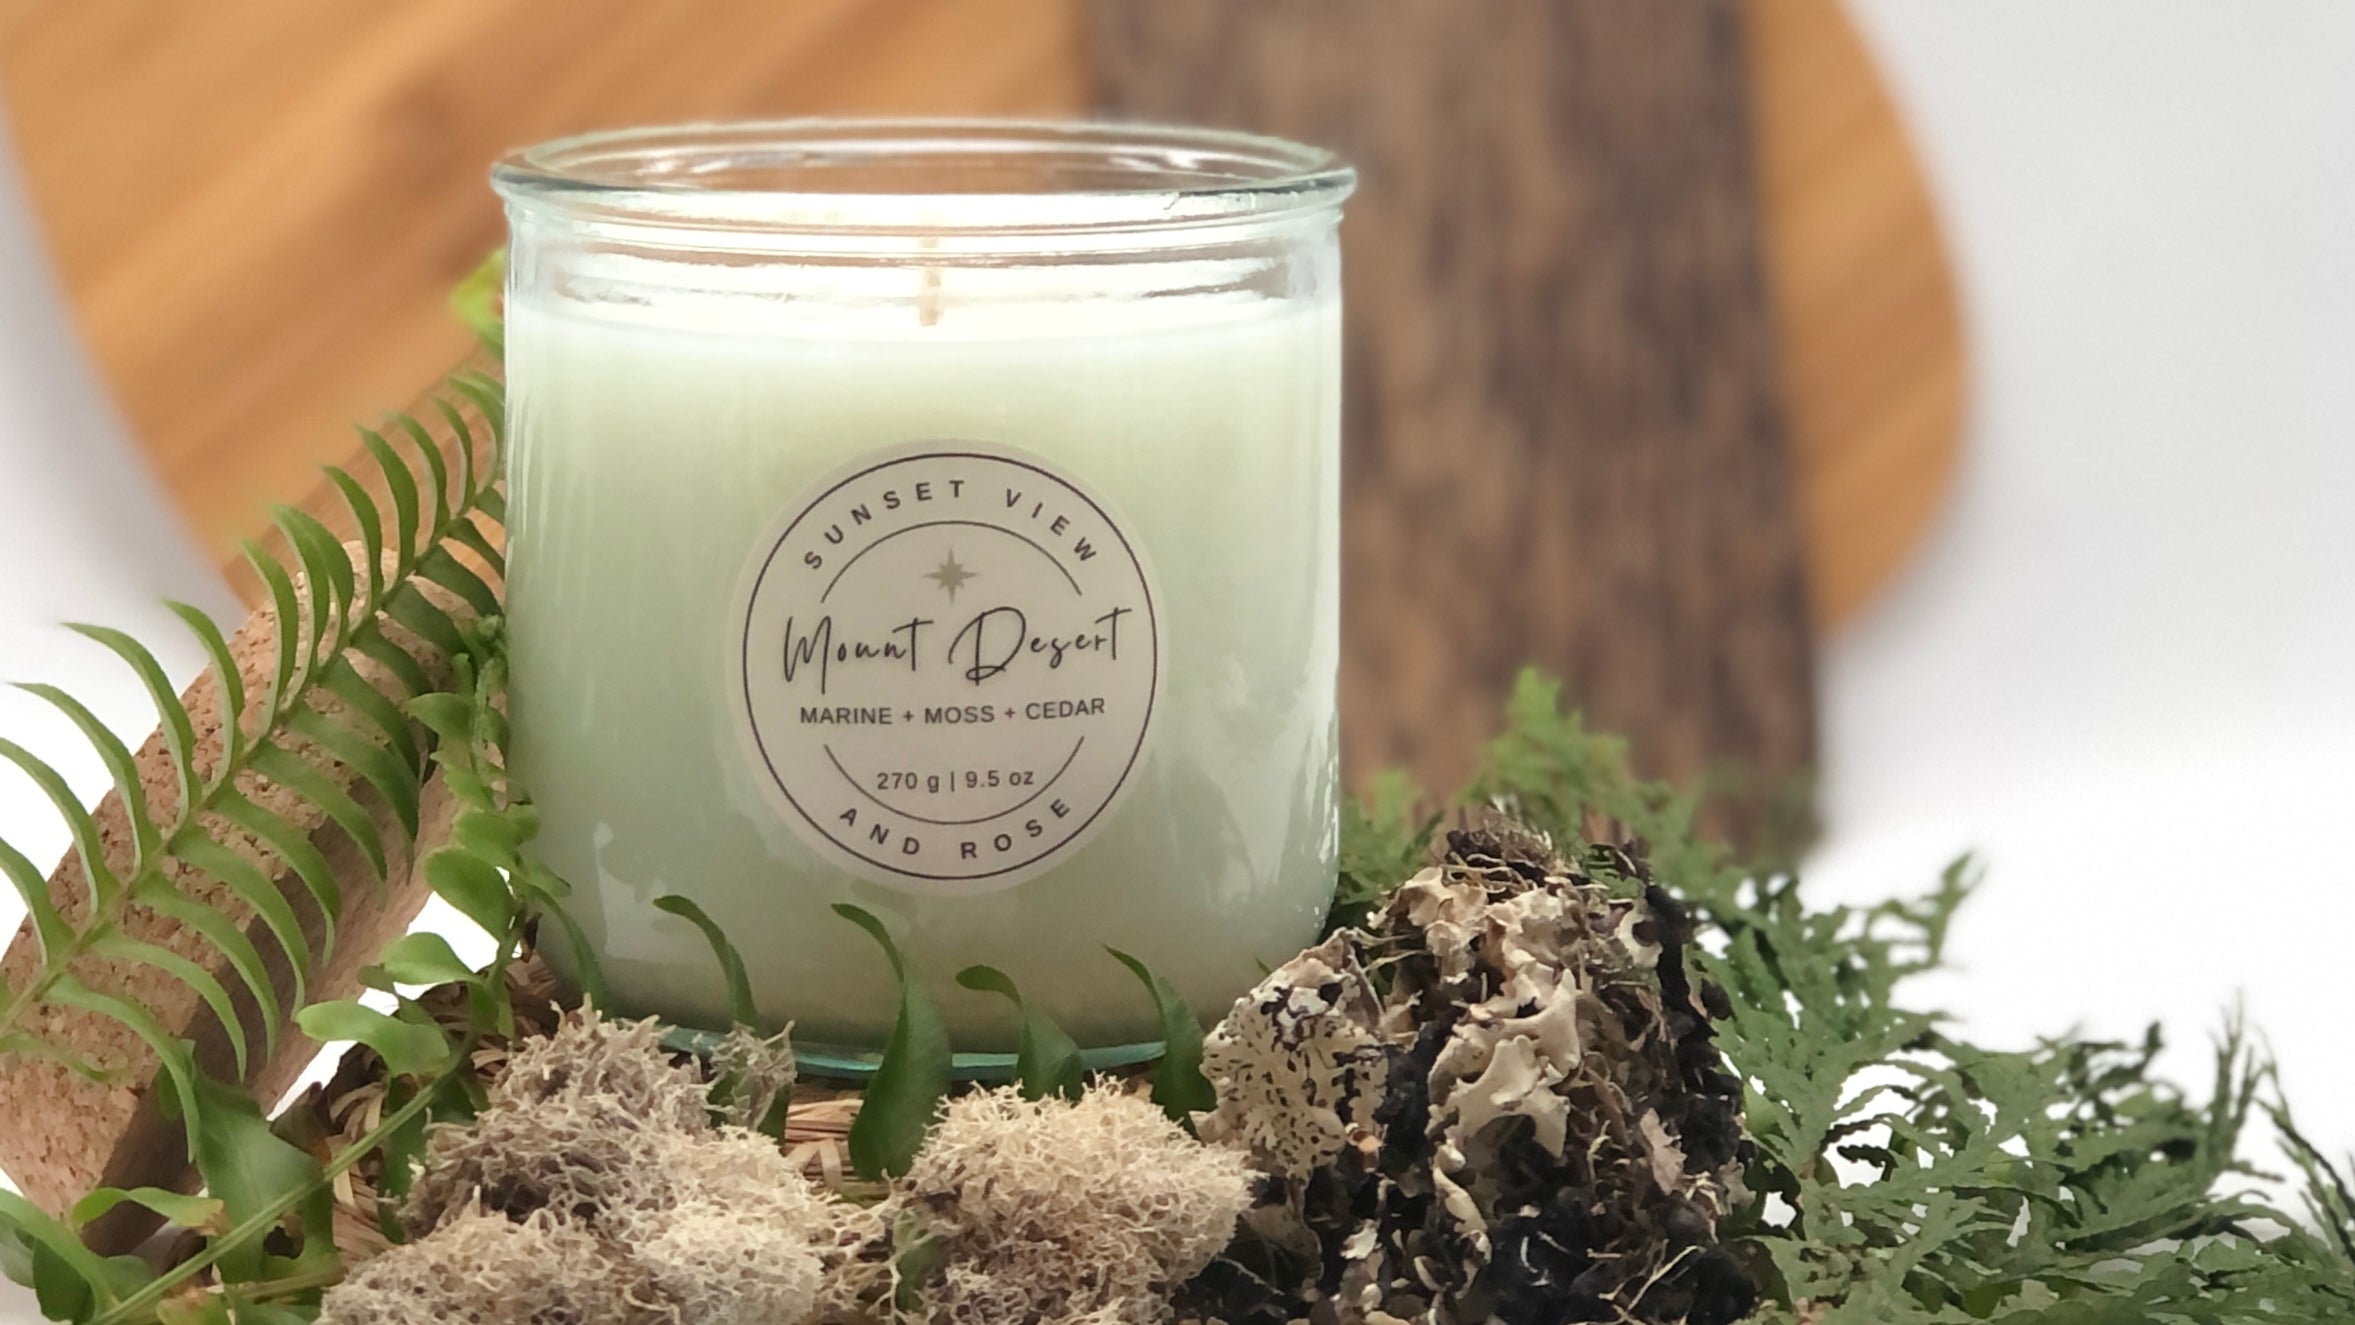 Coconut apricot wax scented candle resting on a bed of moss and ferns invokes feelings of the outdoors.  